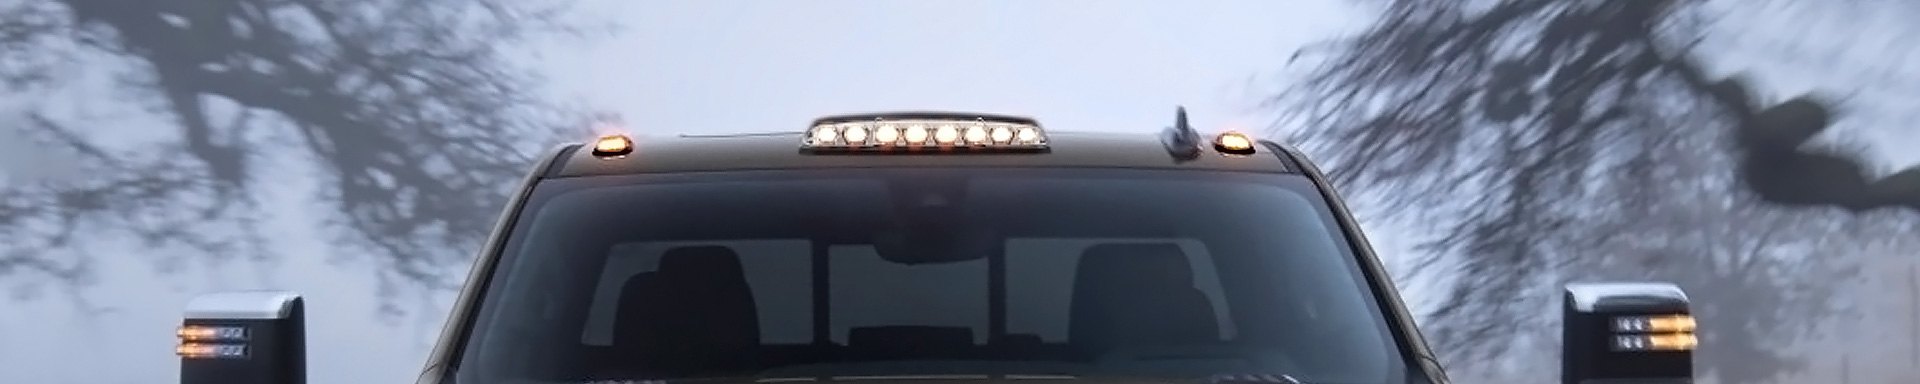 Lumen Now Offers LED Cab Roof Lights for Chevy Silverado and GMC Sierra